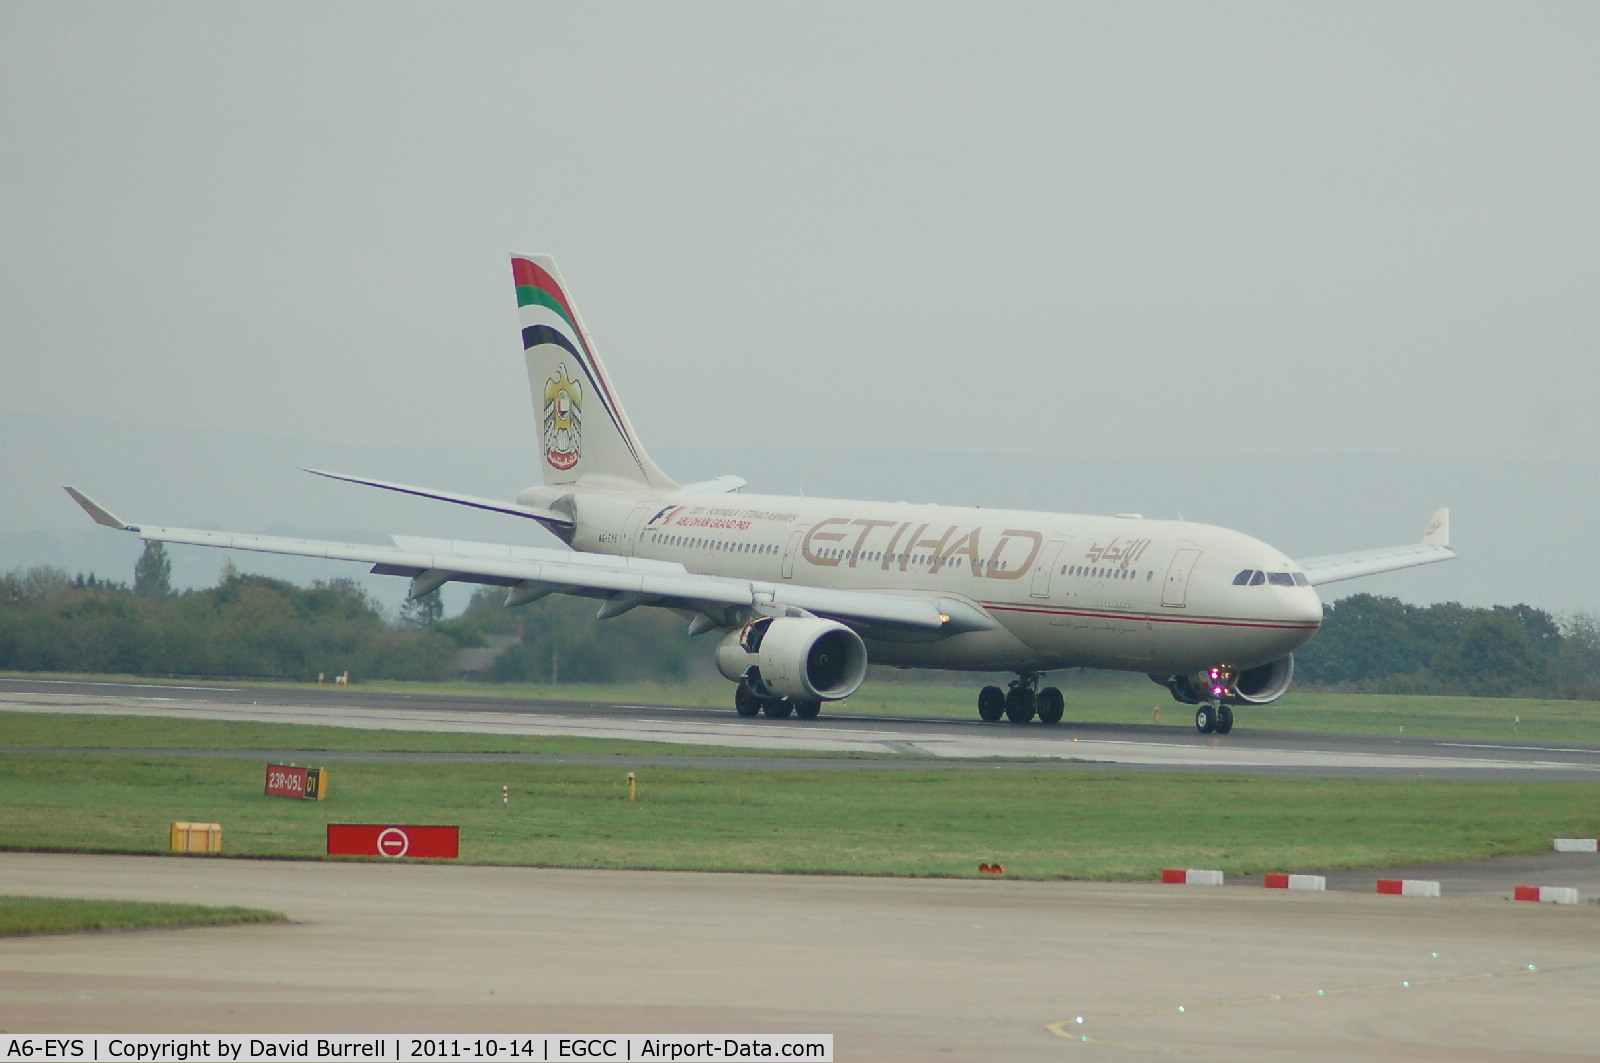 A6-EYS, 2009 Airbus A330-243 C/N 991, Etihad Airbus A330-243 Lands at Manchester.